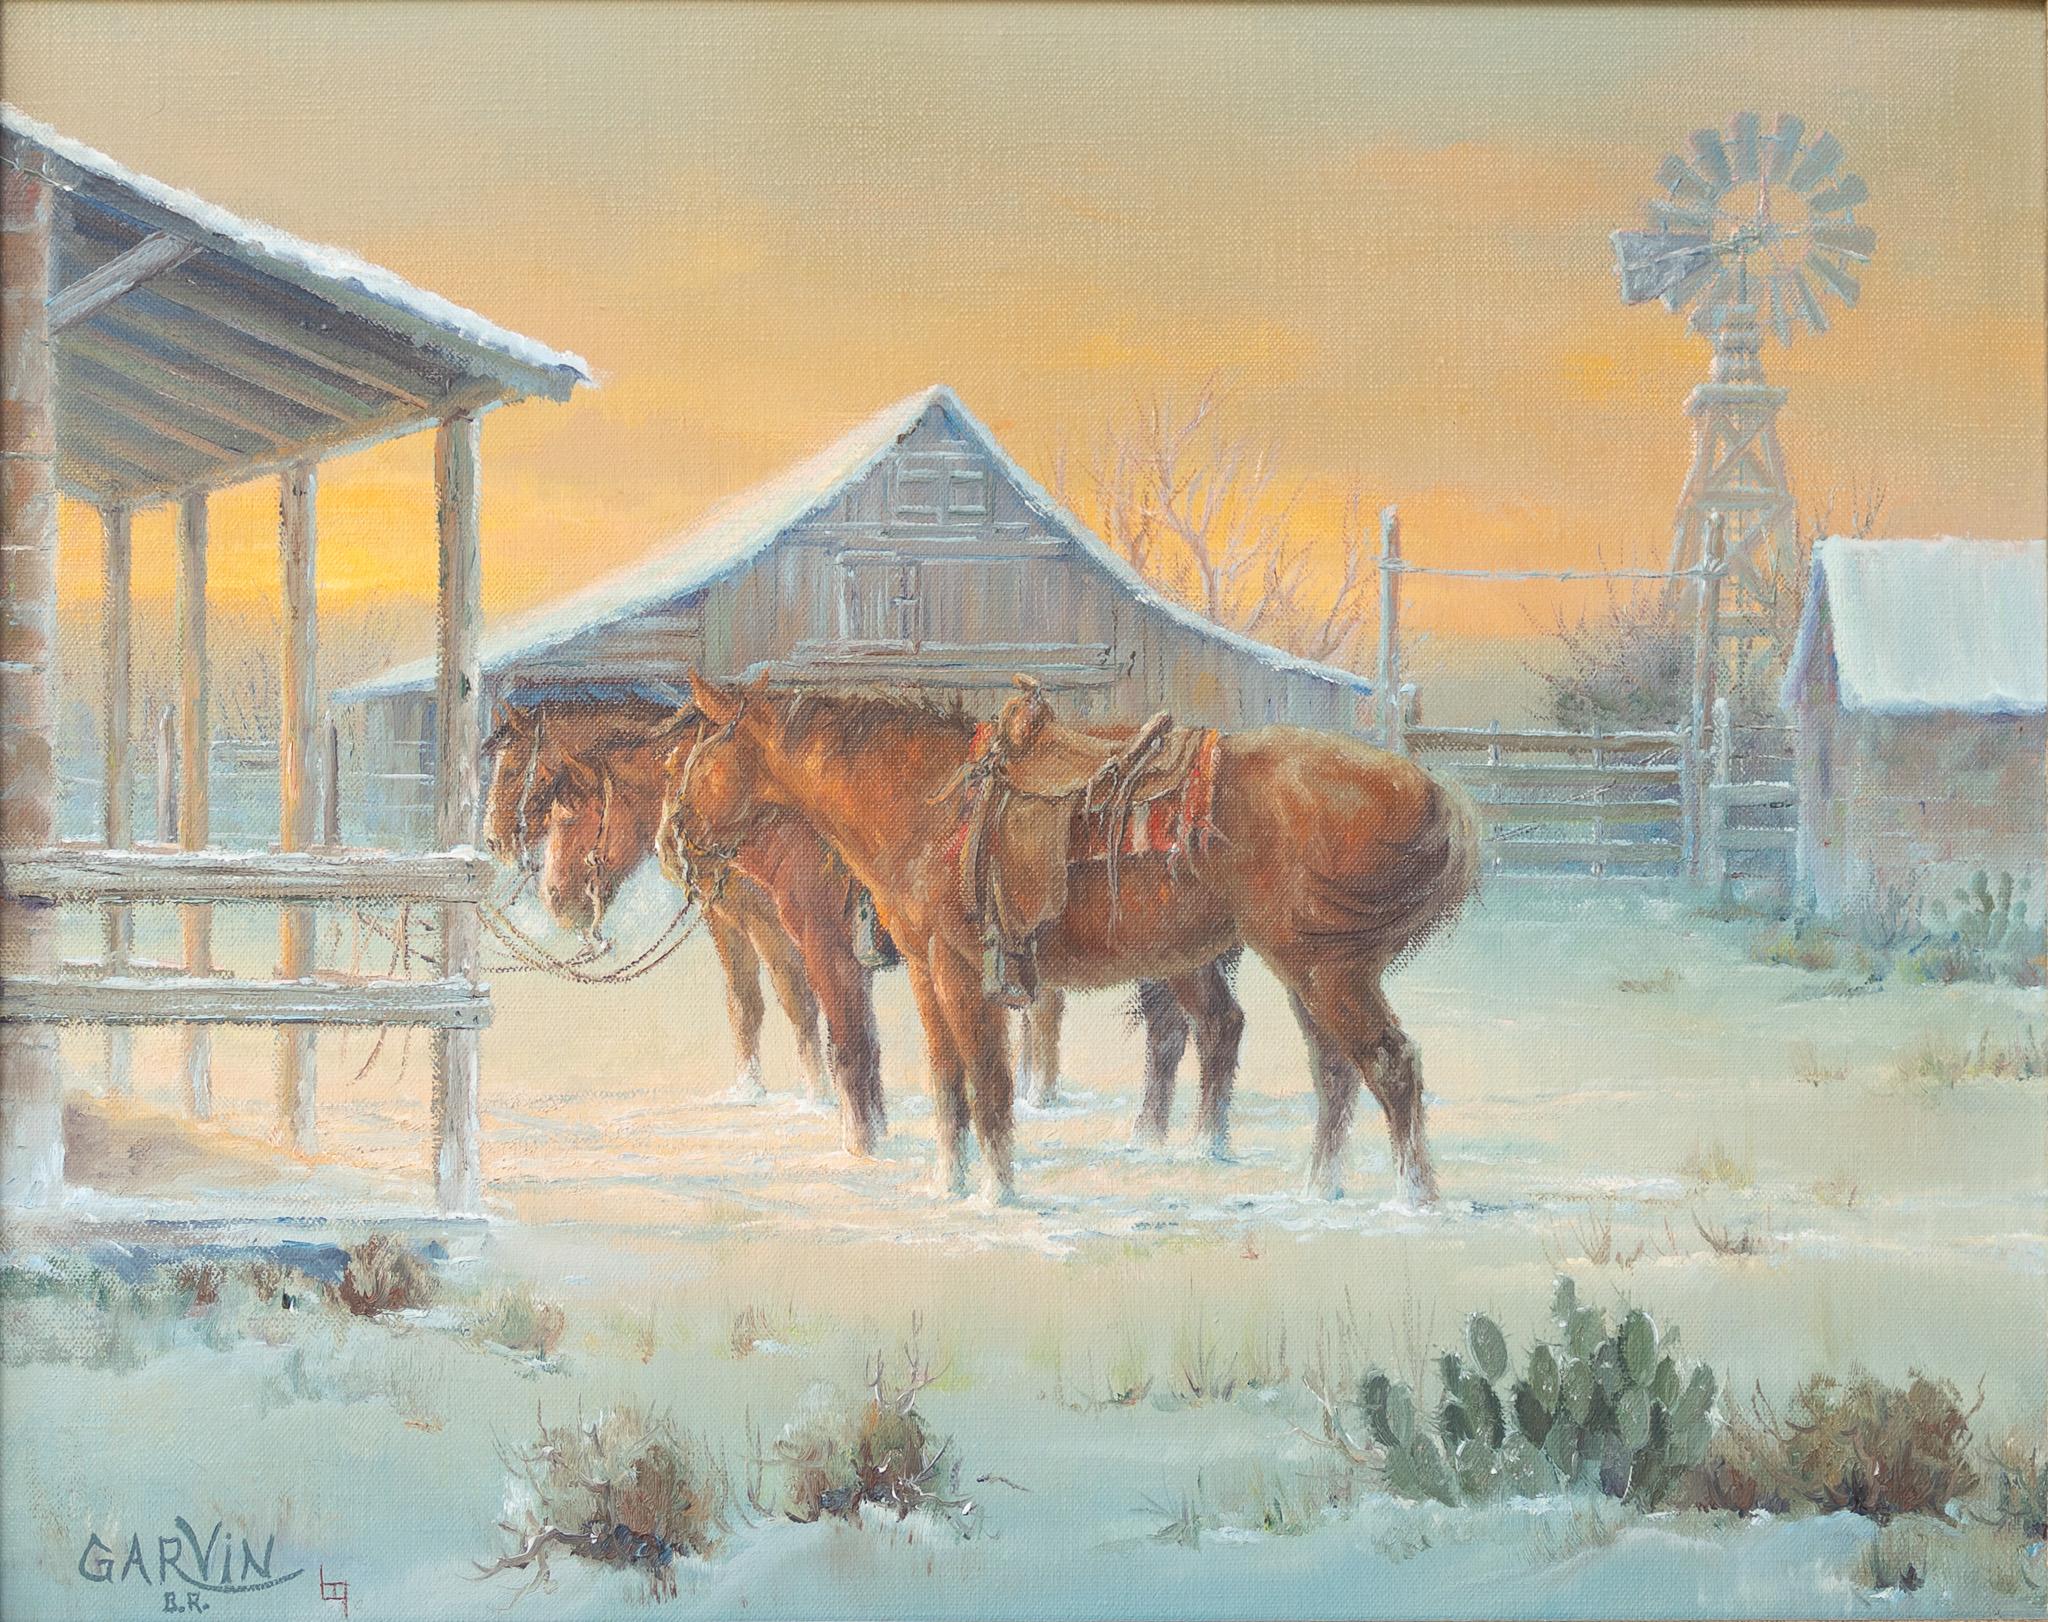 Barbara Garvin Landscape Painting - "Cold Saddle Sunset" Snowy Western Scene with Horses Barn Windmill Country Farm